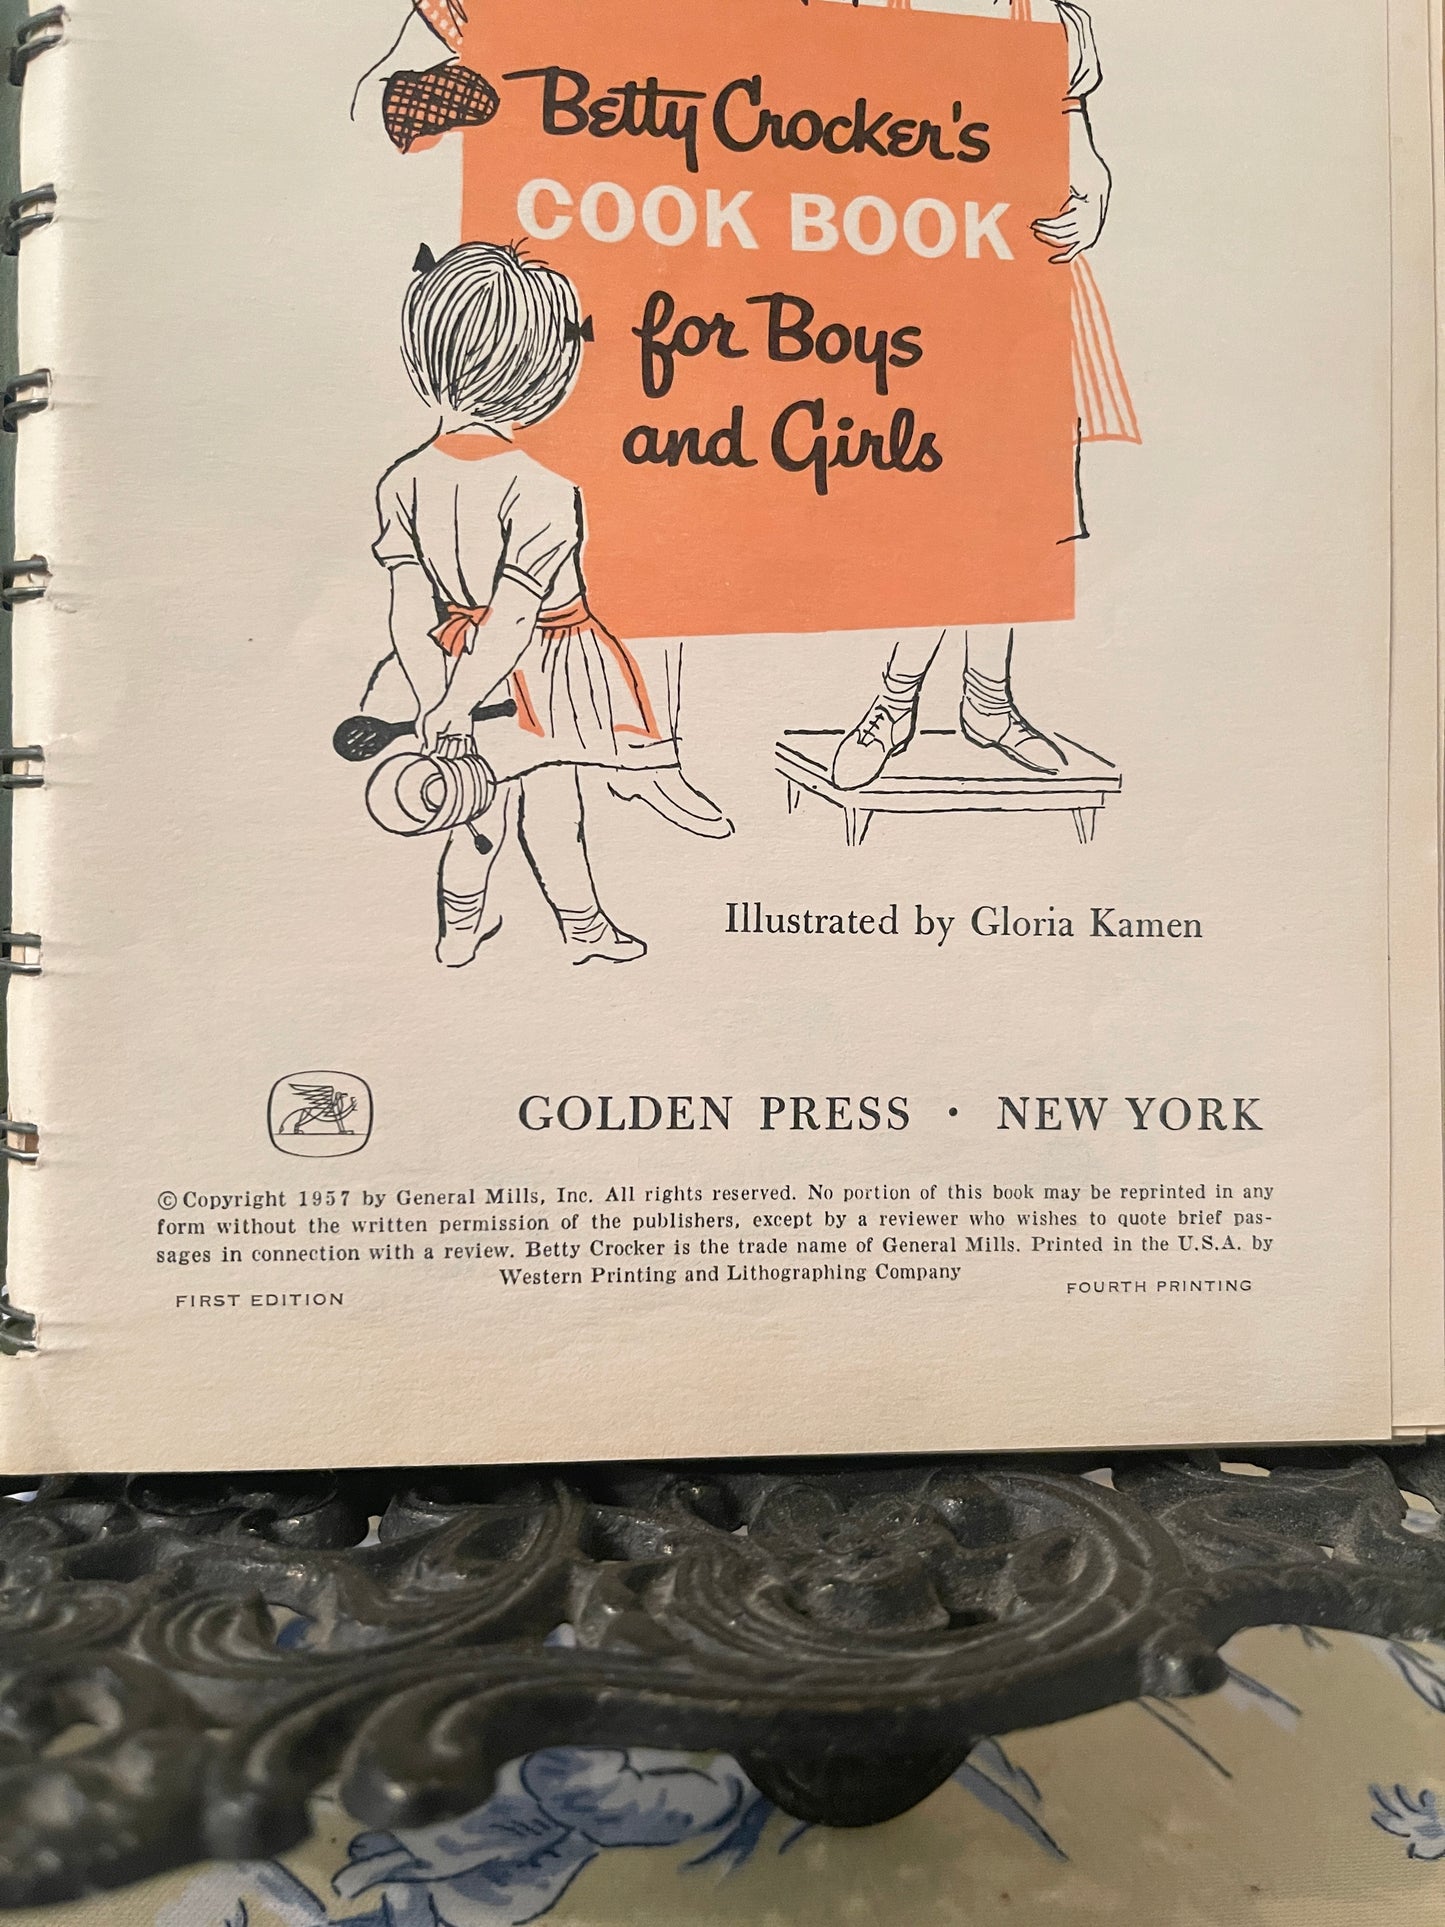 Betty Crocker’s Cookbook for Boys and Girls, 1957 First Edition, Fourth Printing